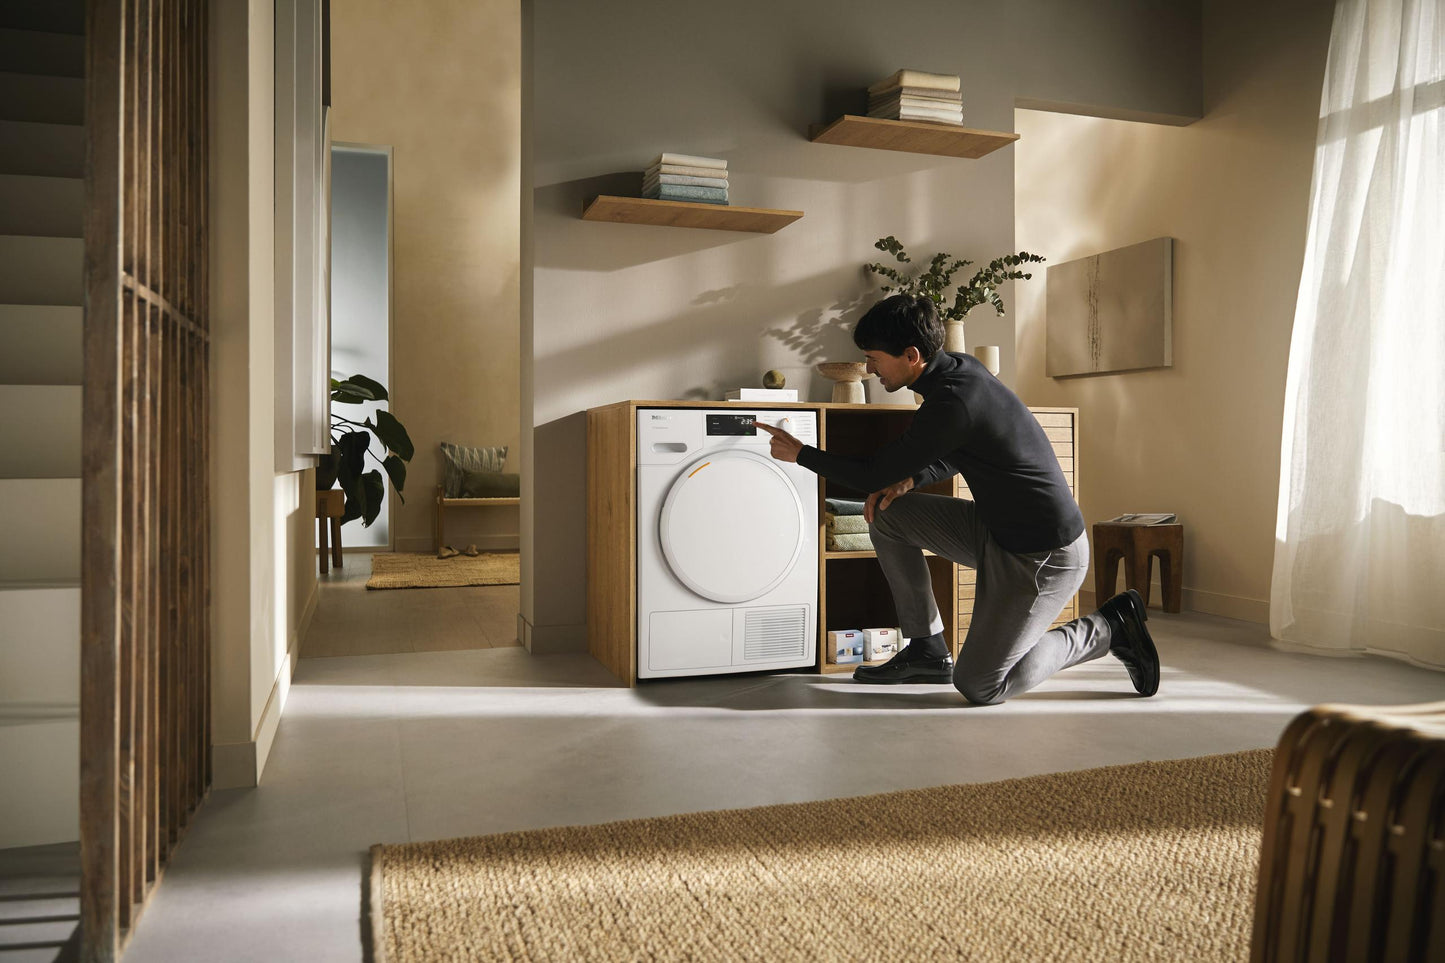 Miele TXD160WPLOTUSWHITE Txd160Wp - T1 Heat-Pump Dryer: With Miele@Home And Fragrancedos For Laundry That Smells Great.